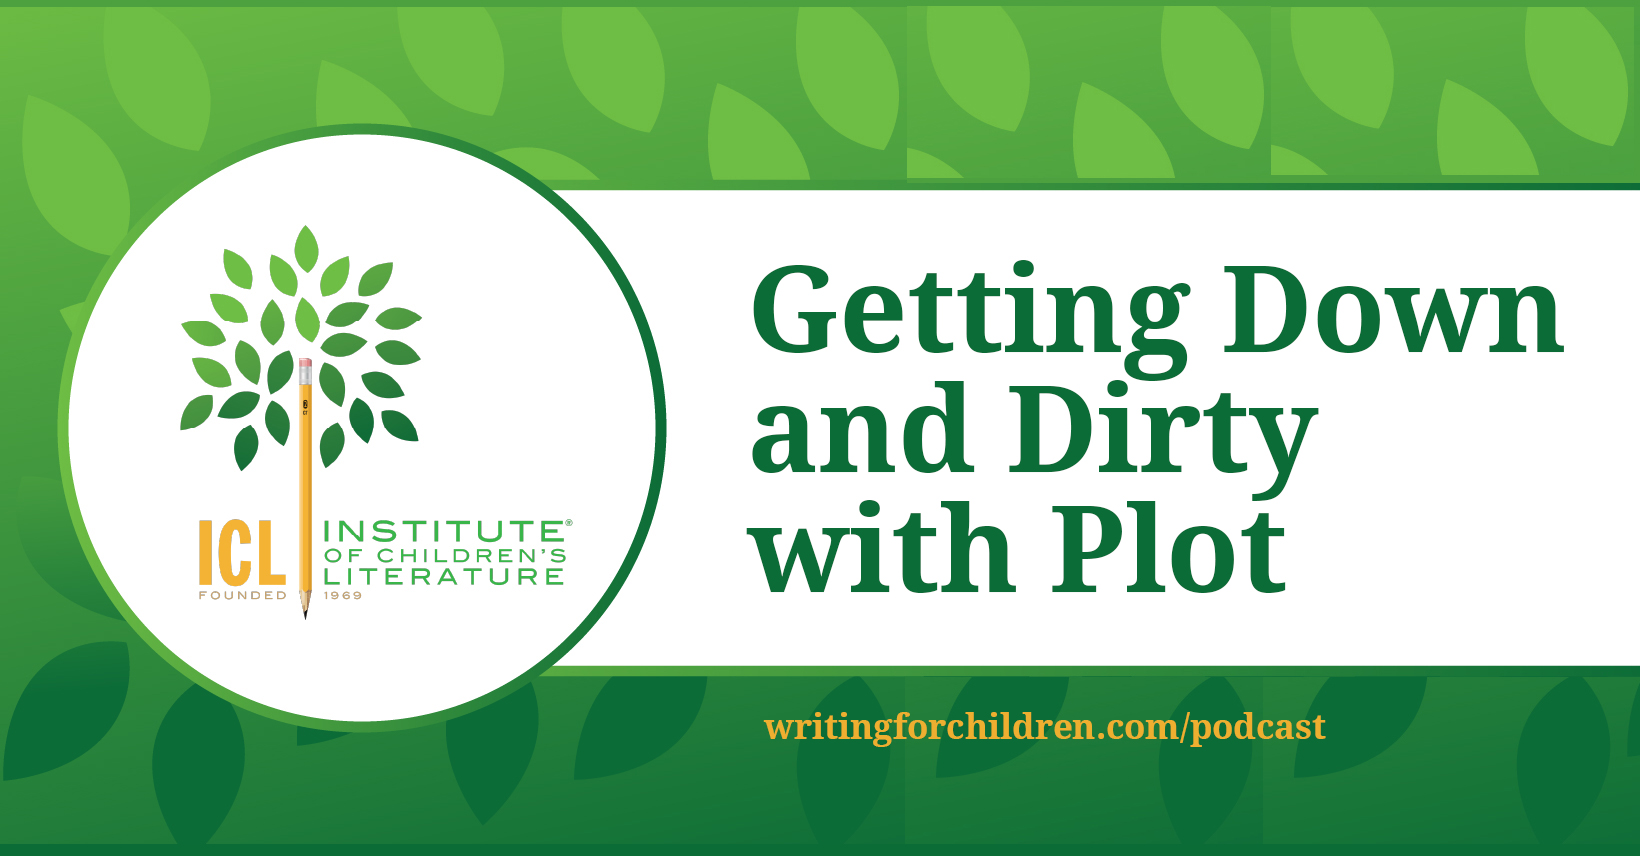 Getting Down and Dirty with Plot Episode 204